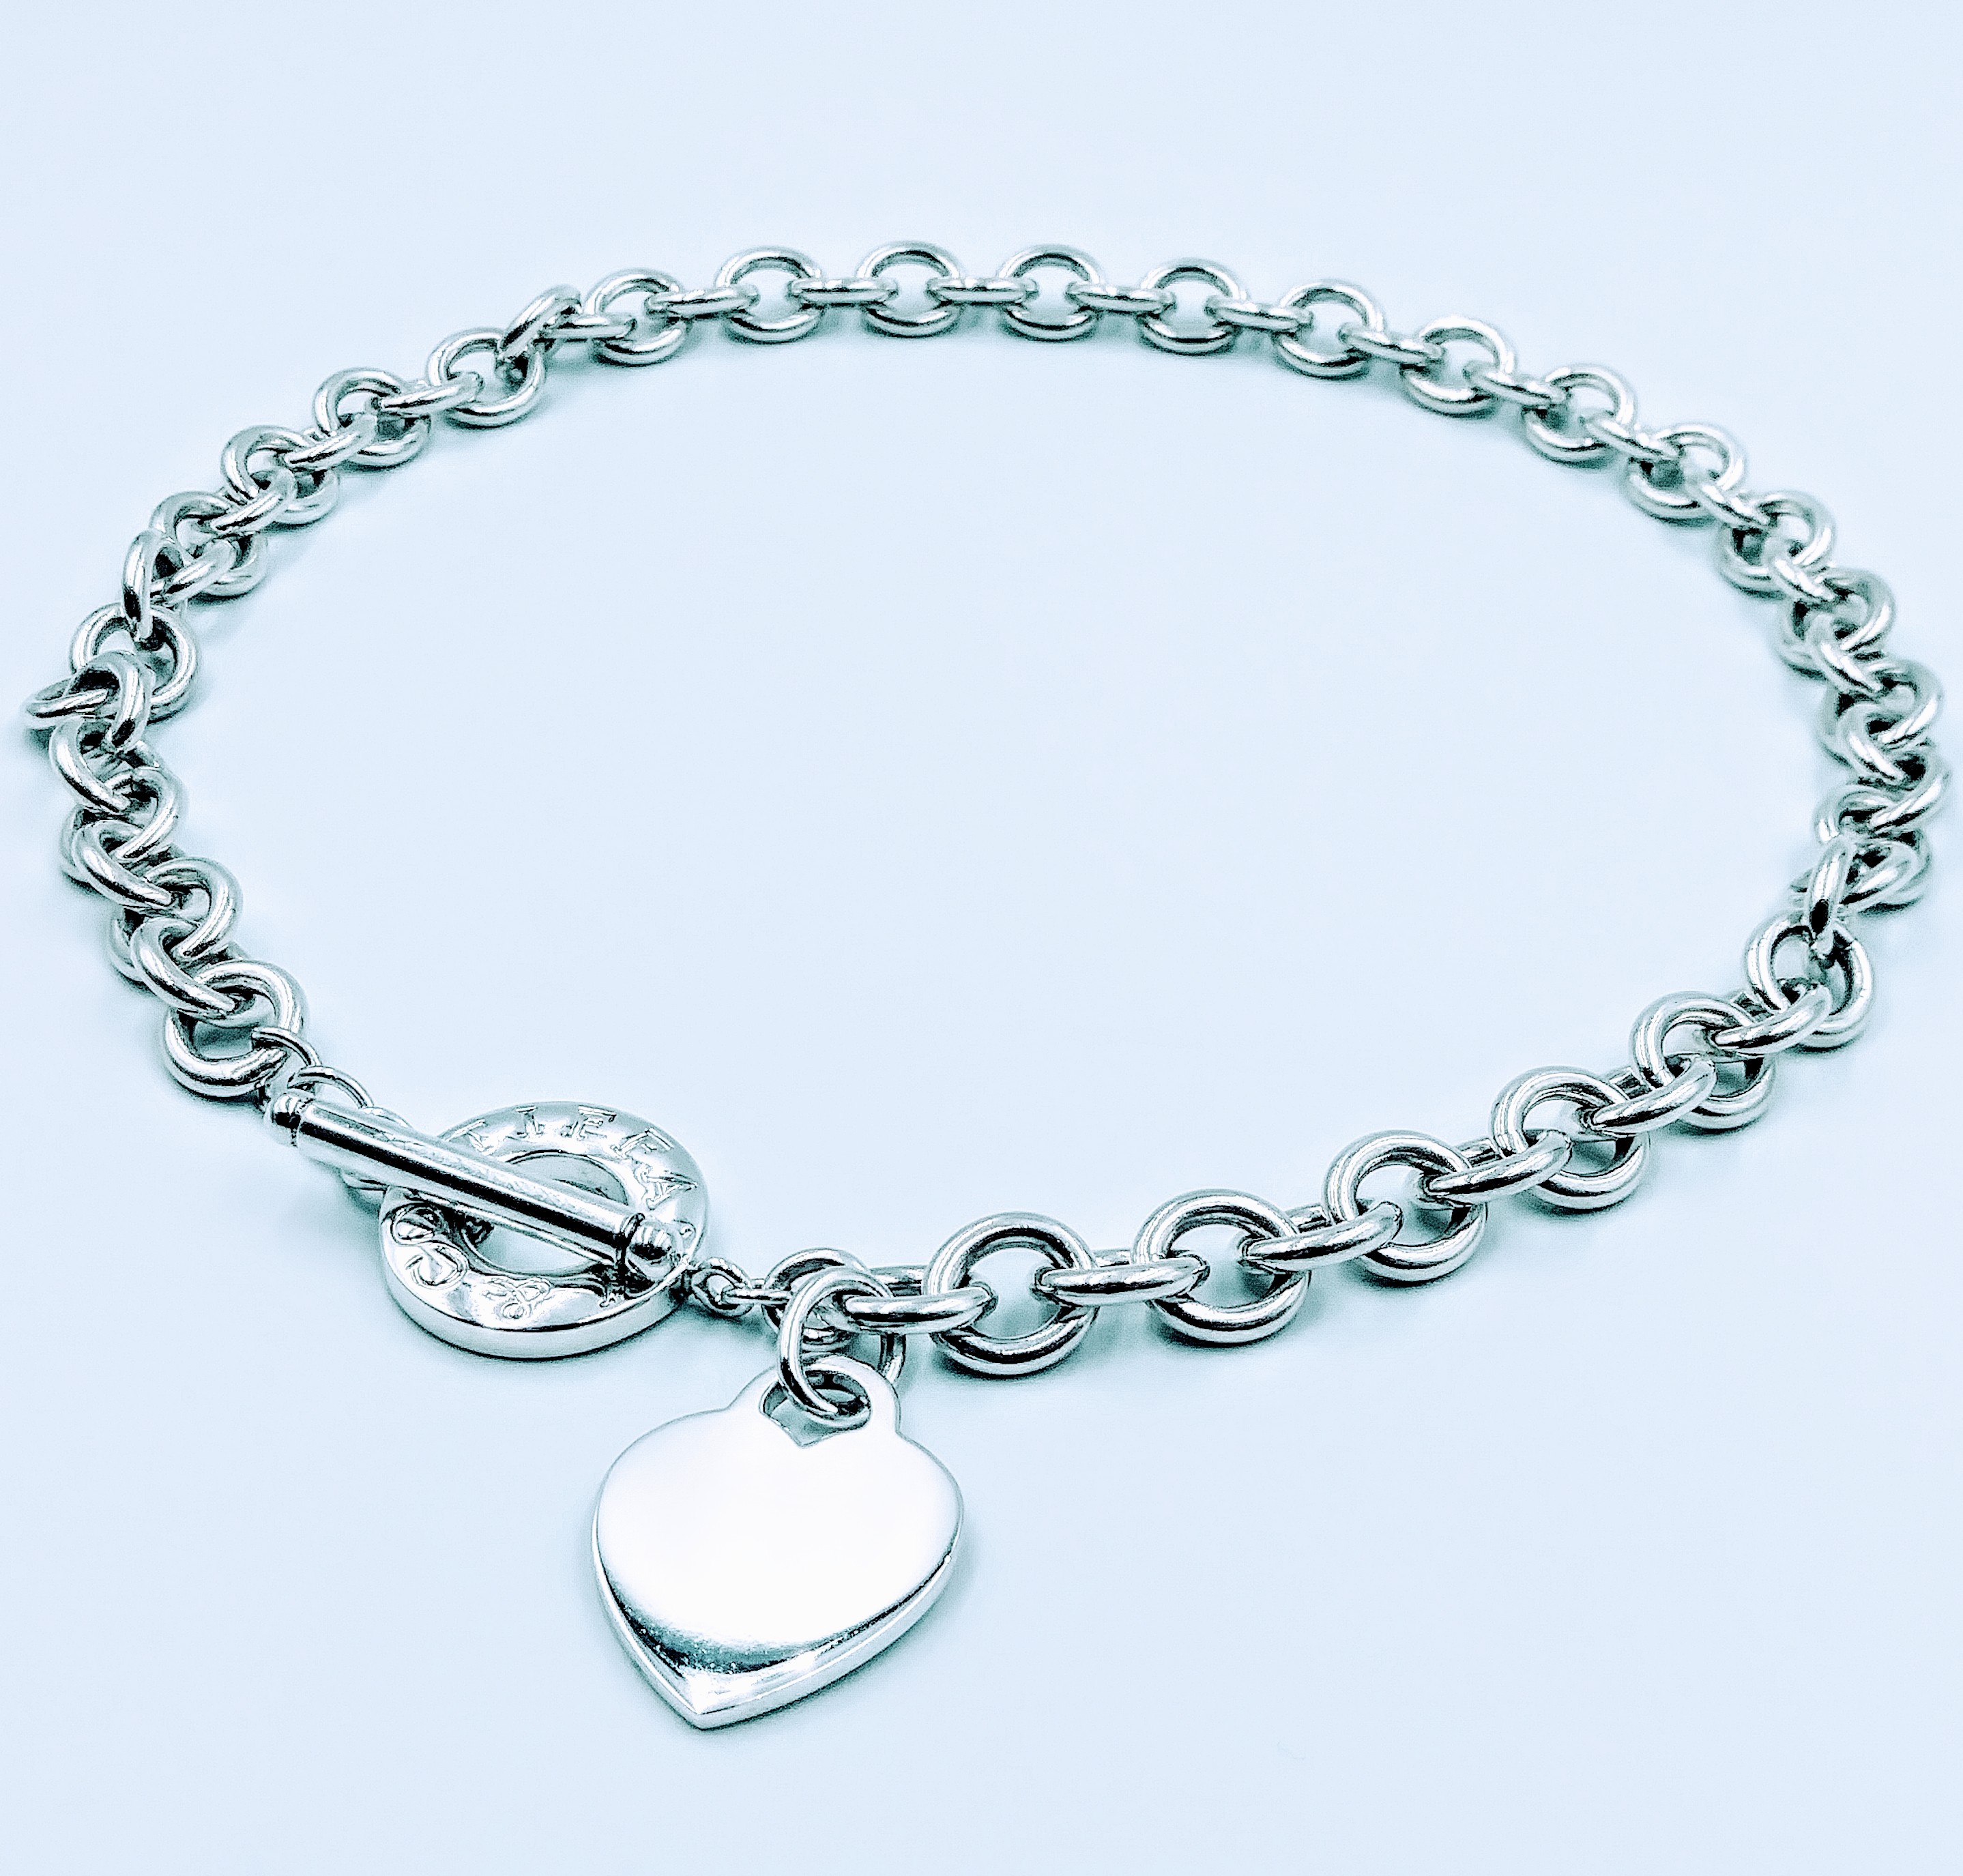 Tiffany And Co 925 Sterling Silver Heart Charm Toggle Necklace 16 ⋆ Smartshop Jewelry